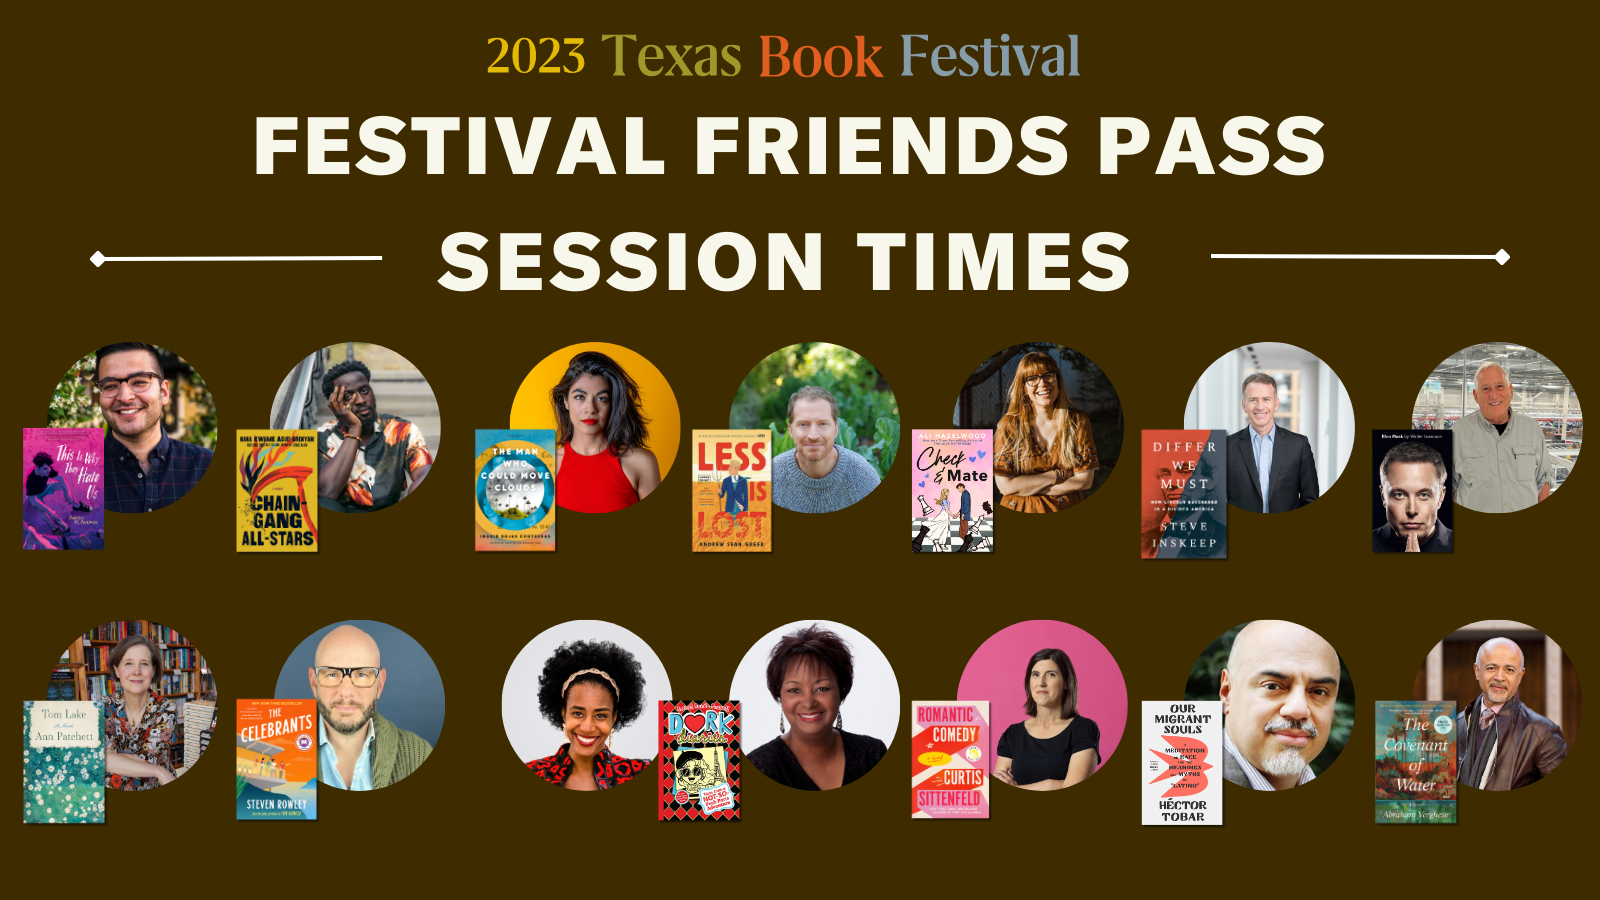 Festival Friends Pass Author Headshots and Book Covers